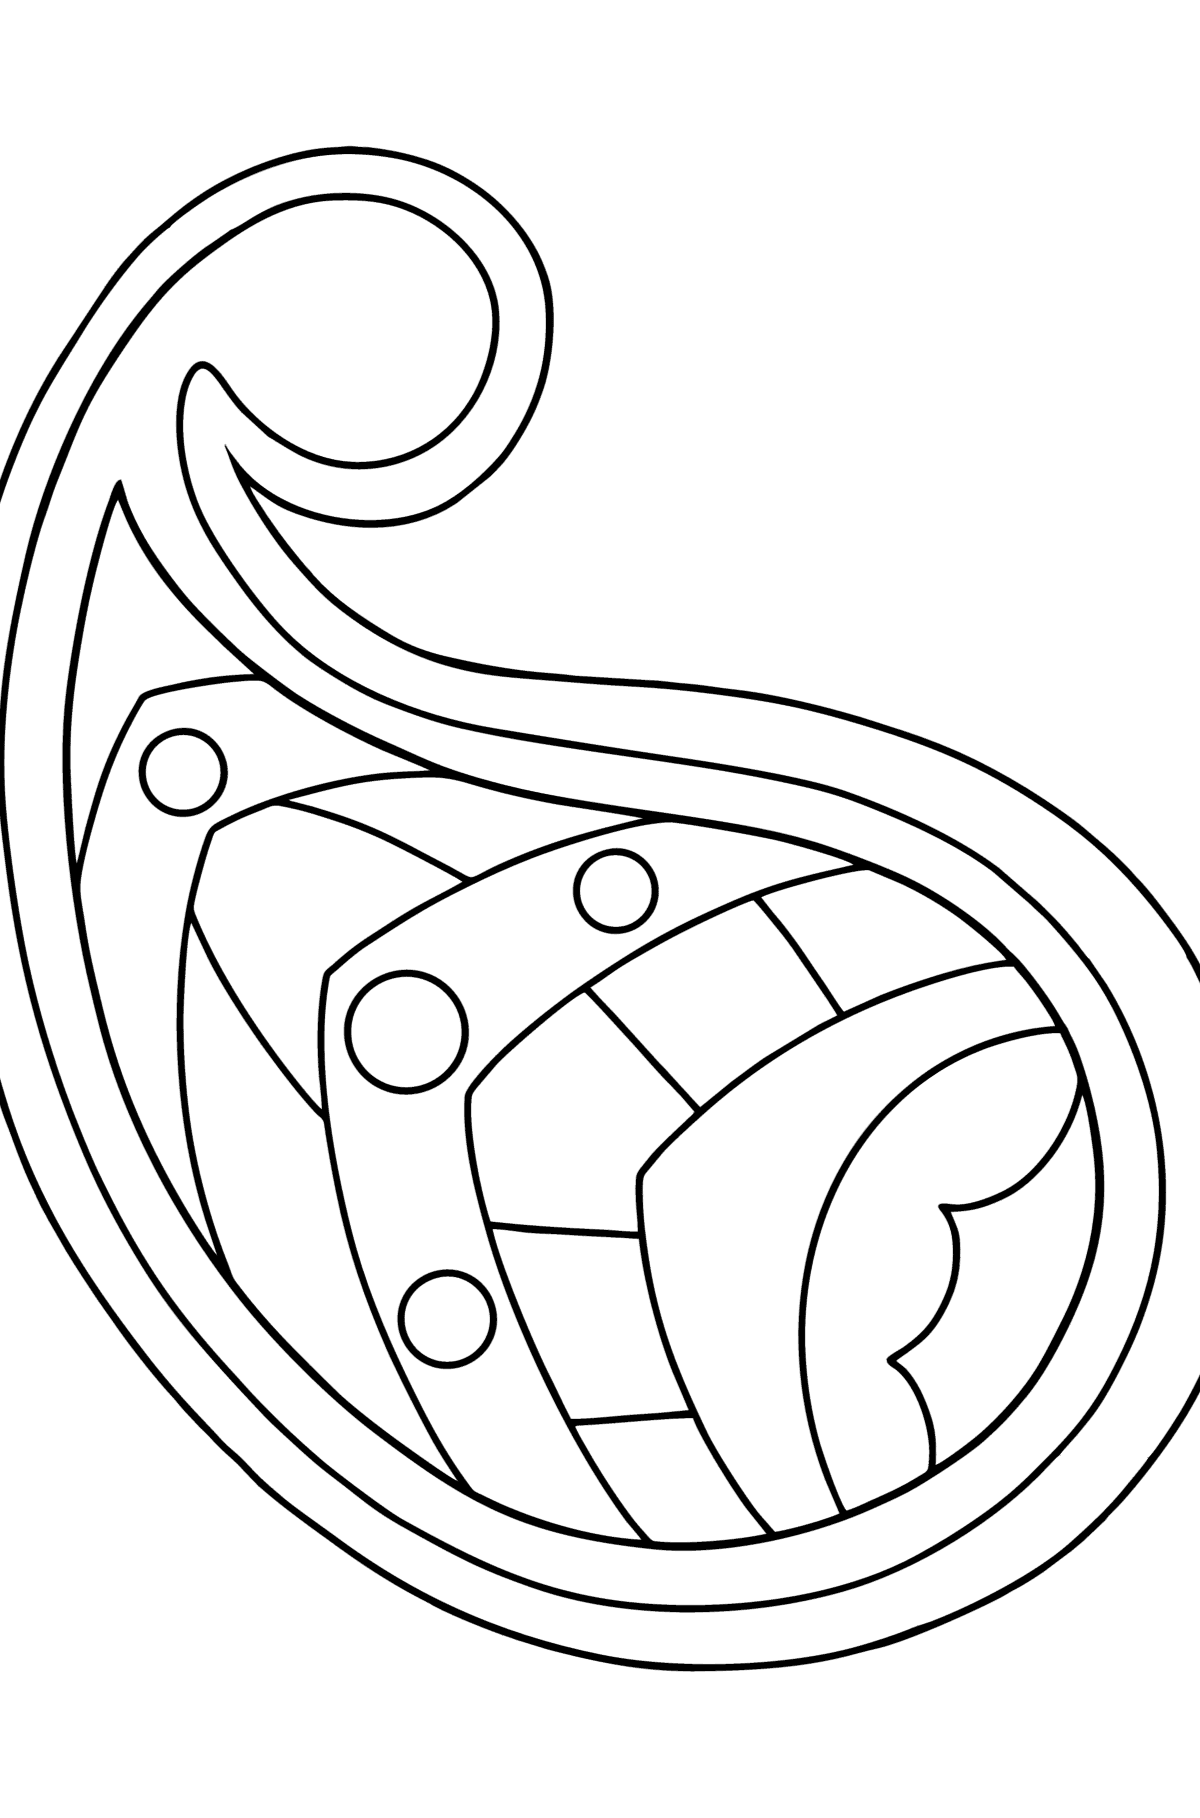 Beautiful Paisley coloring page - Coloring Pages for Kids